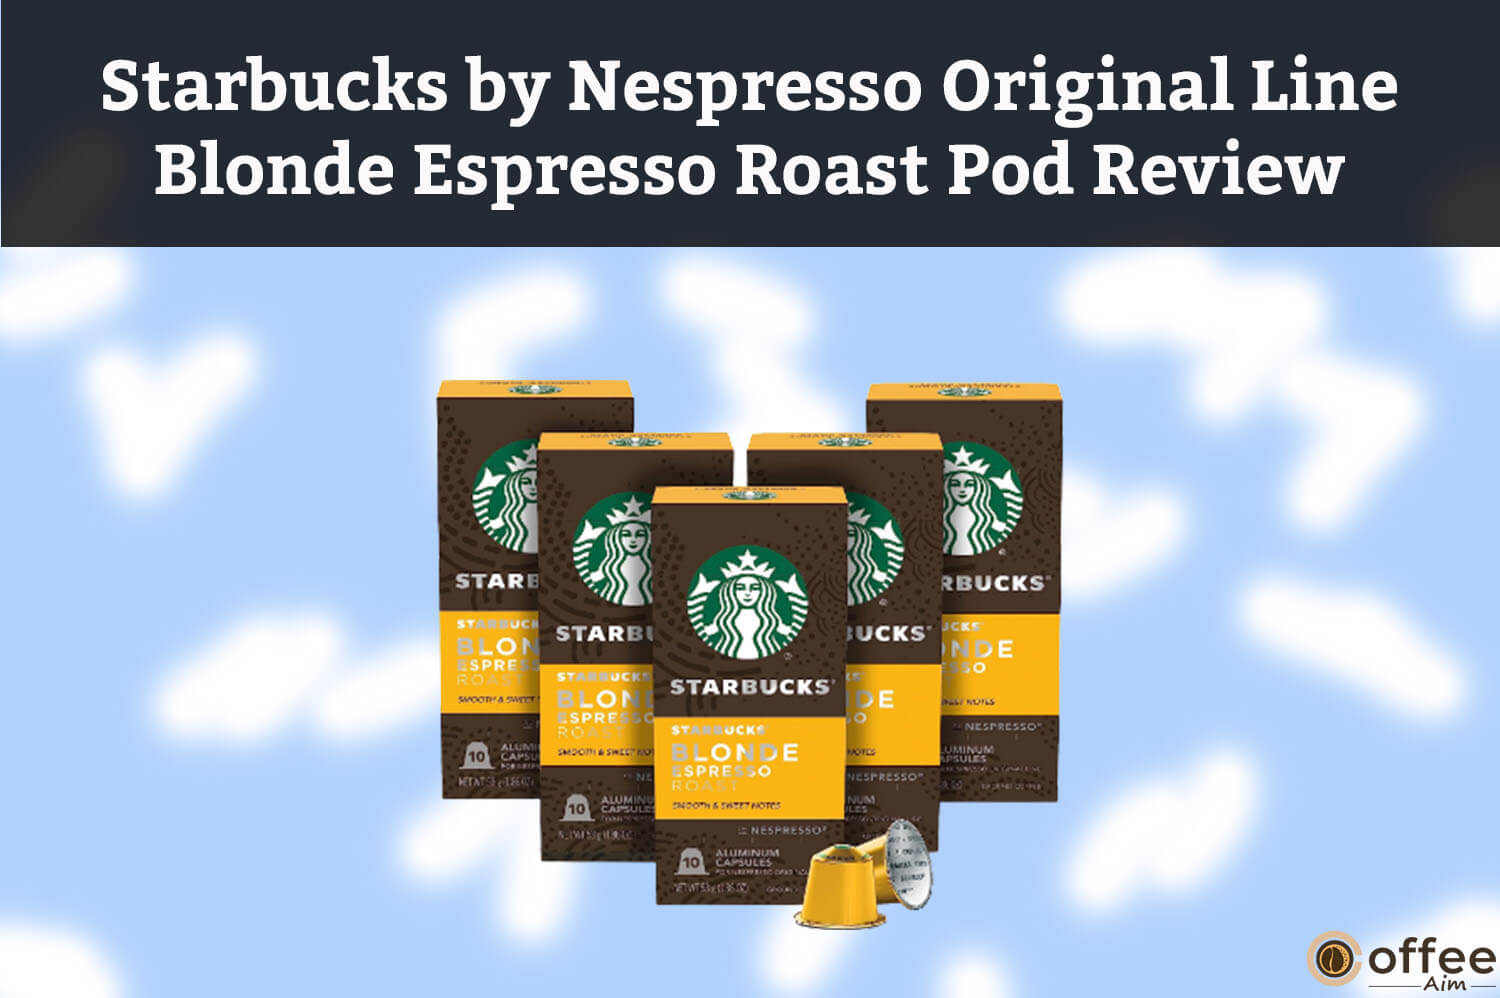 Featured image for the article "Starbucks by Nespresso Original Line Blonde Espresso Roast Pod Review"